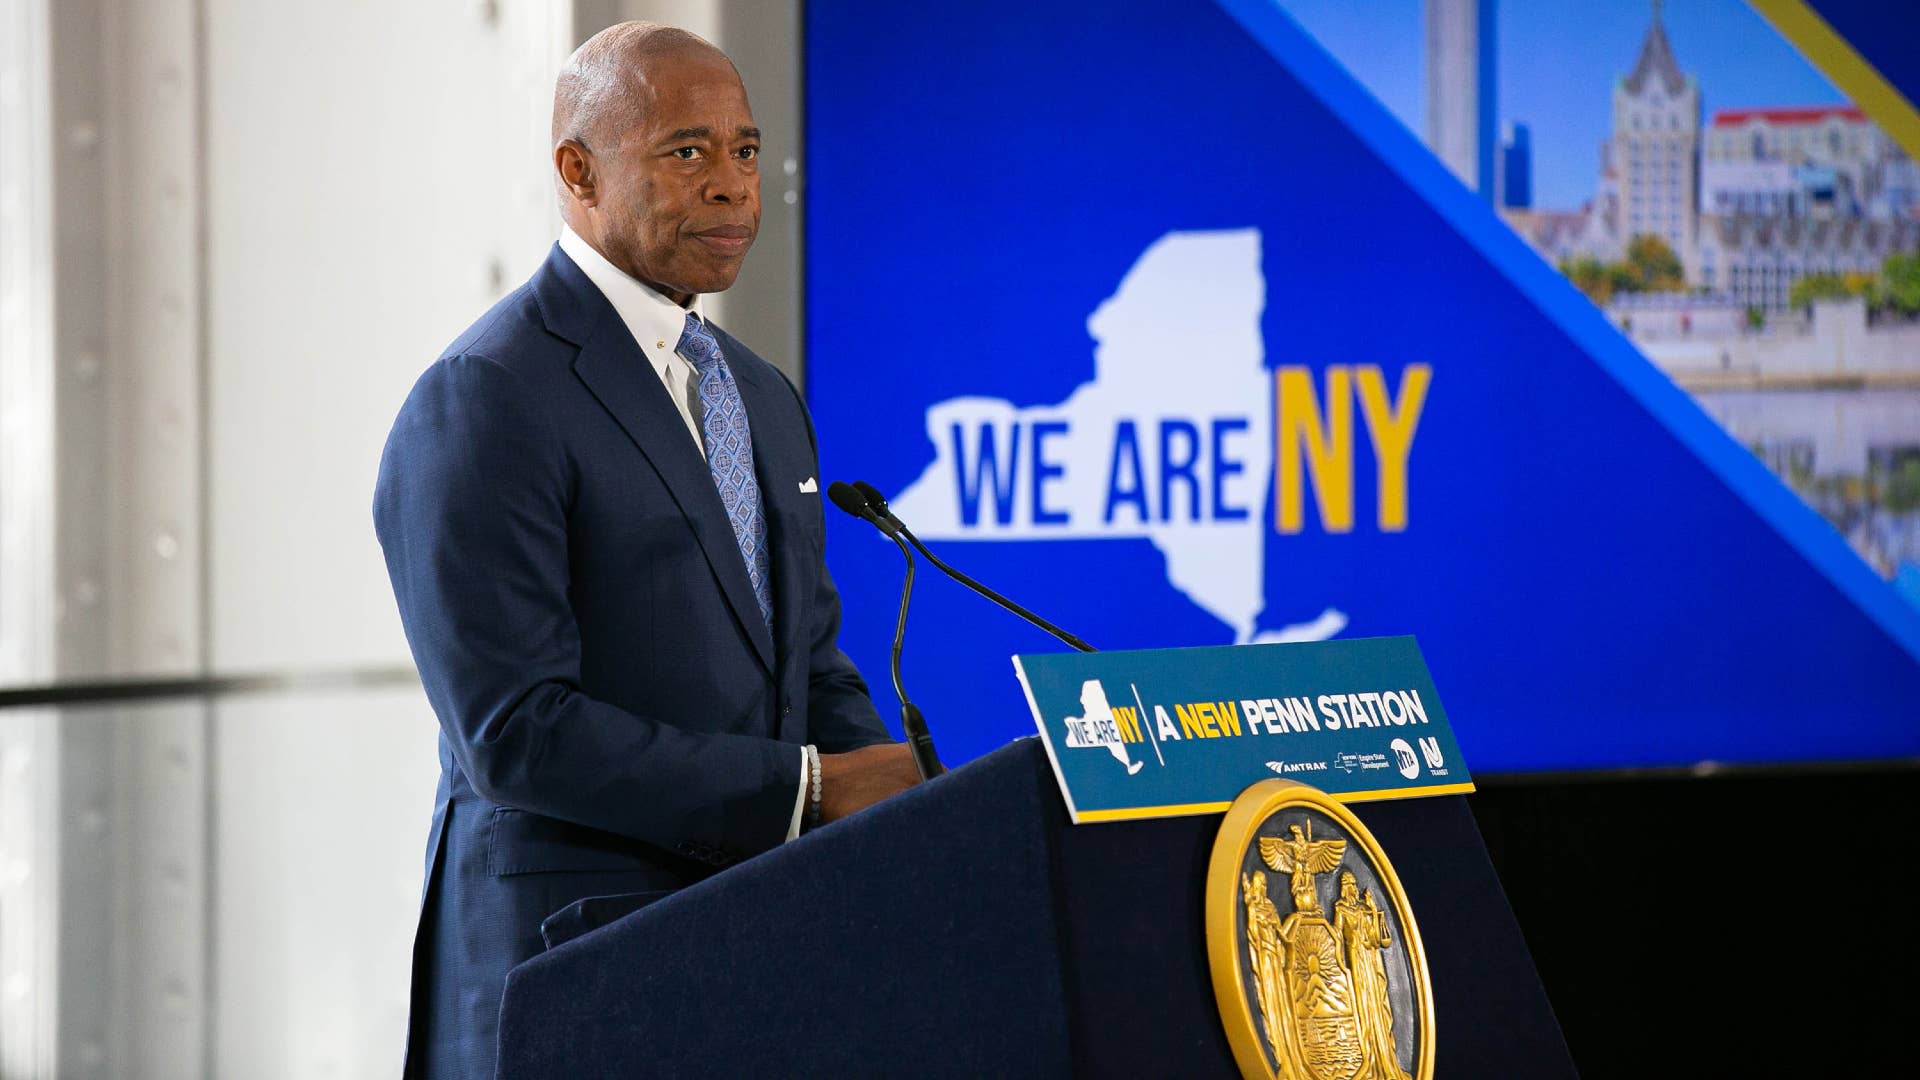 NYC Mayor Eric Adams is pictured at a podium